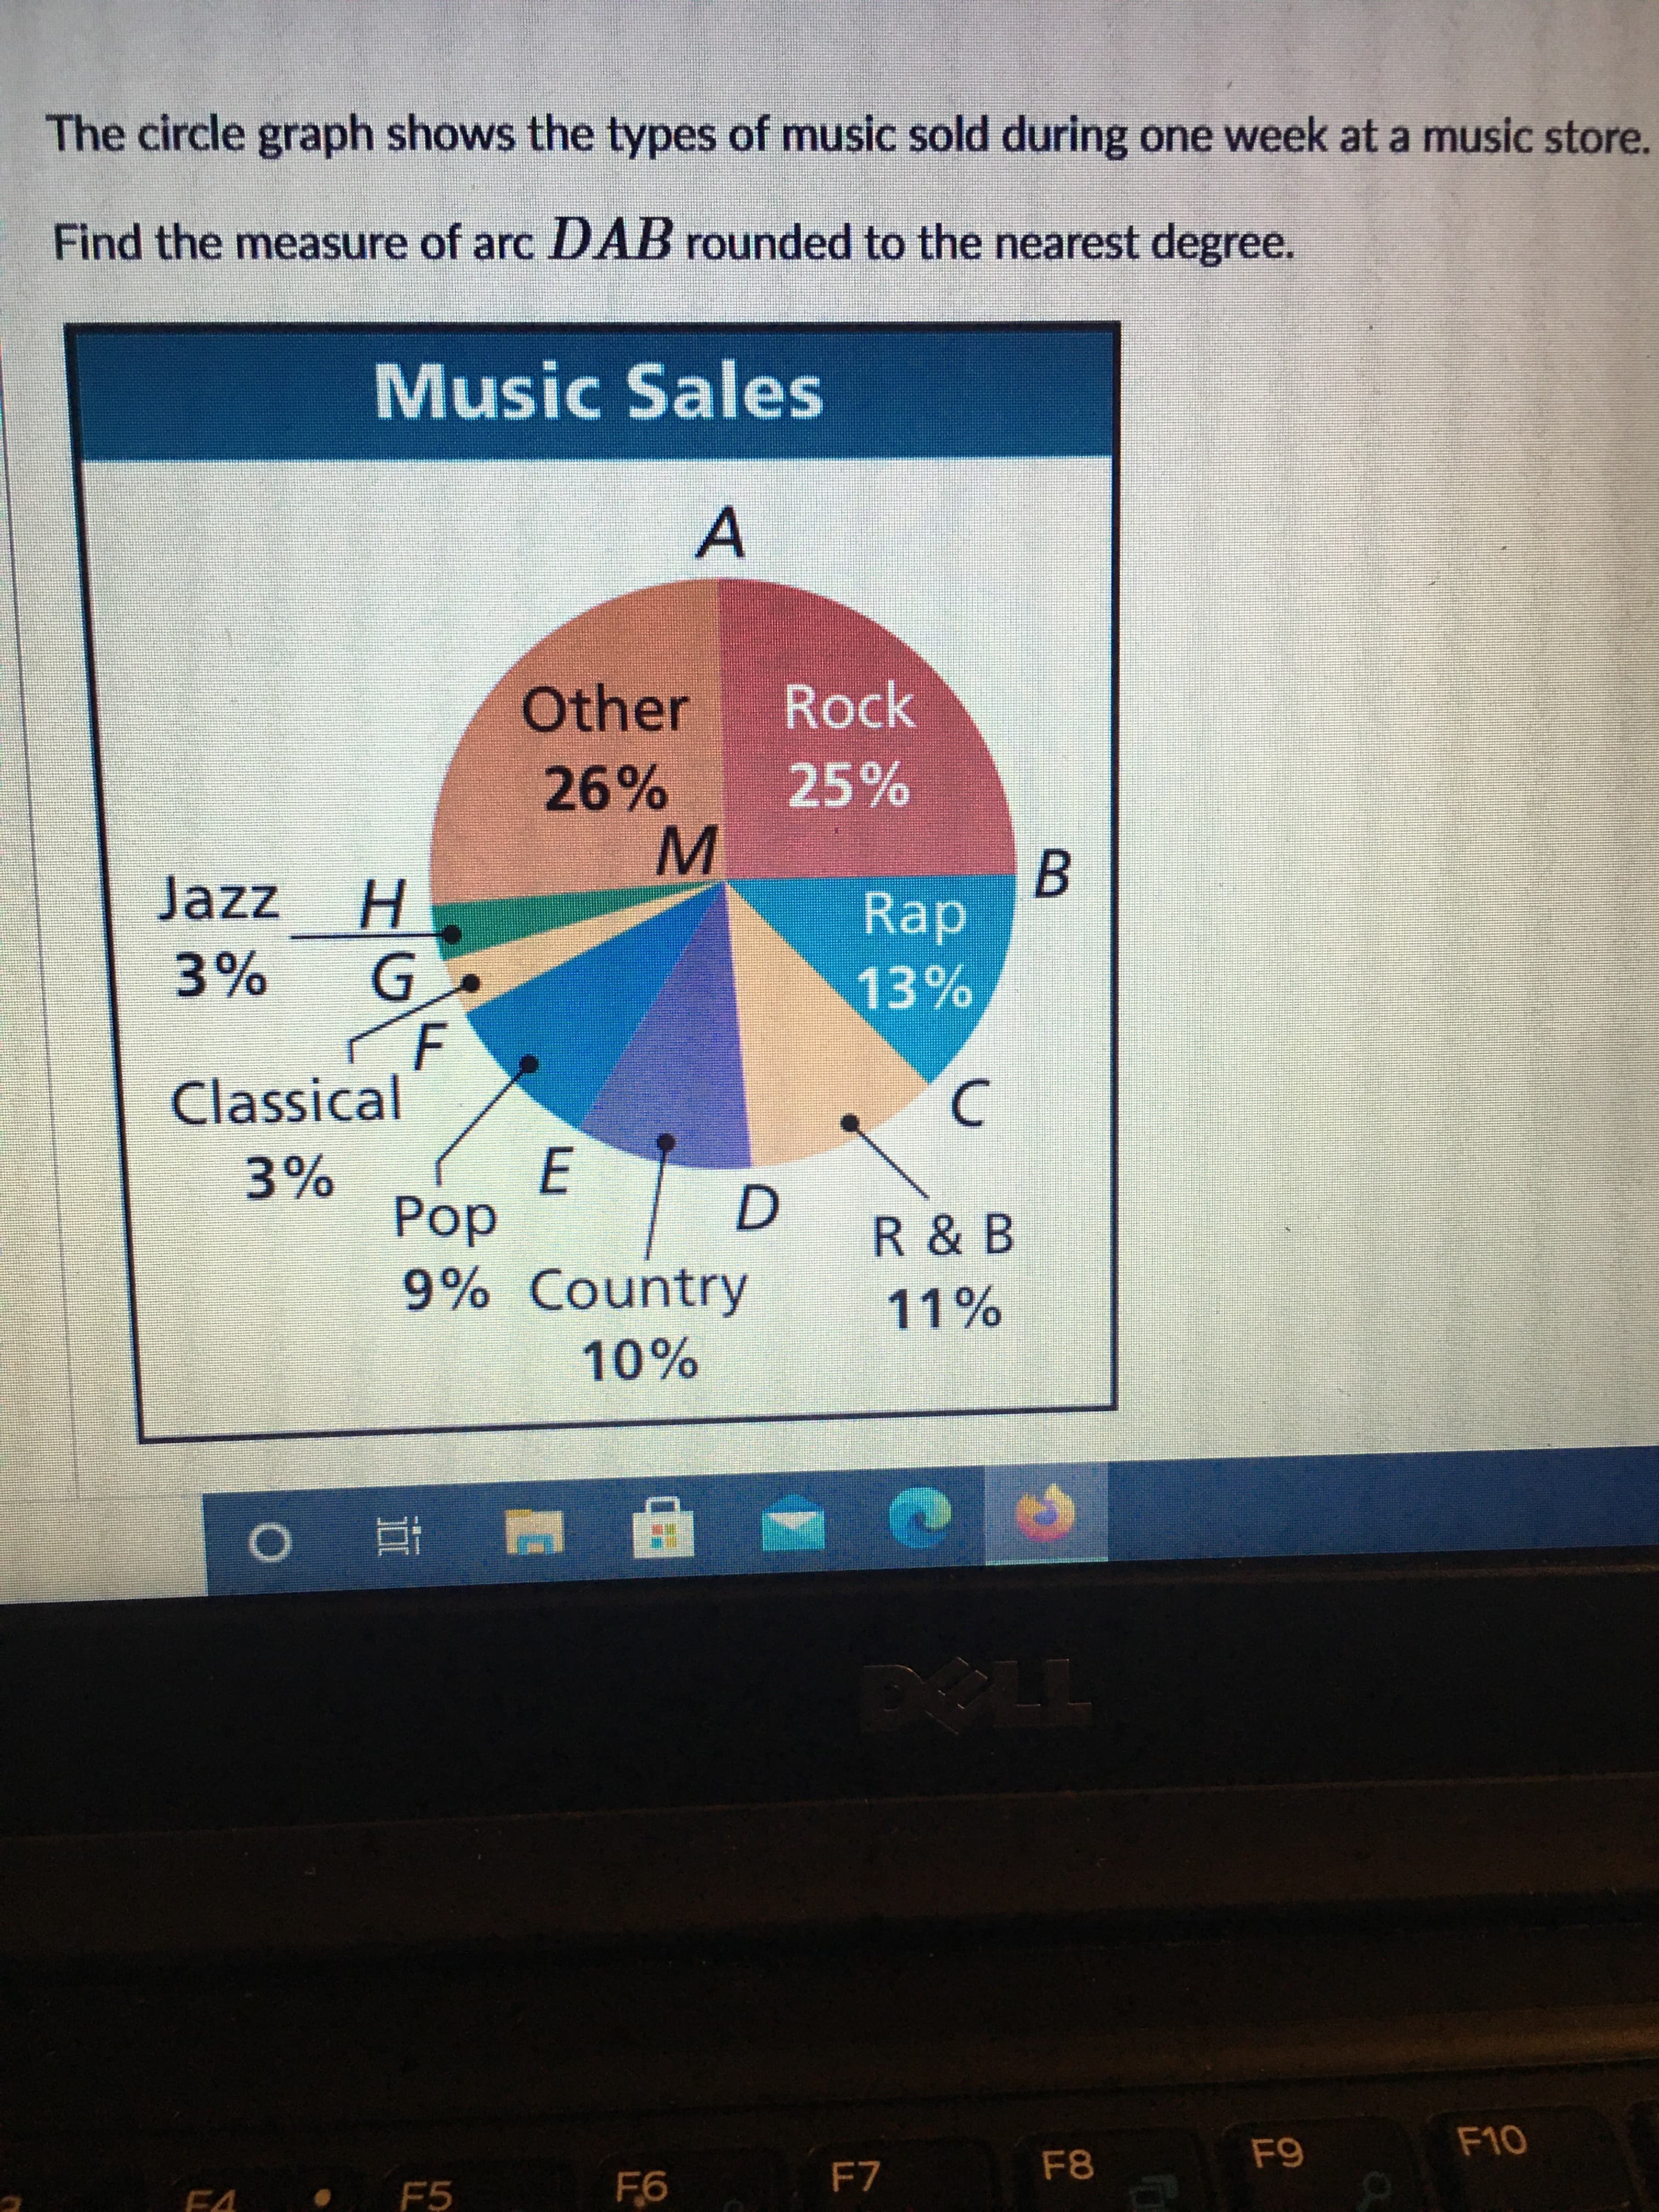 The circle graph shows the types of music sold during one week at a music store.
Find the measure of arc DAB rounded to the nearest degree.
